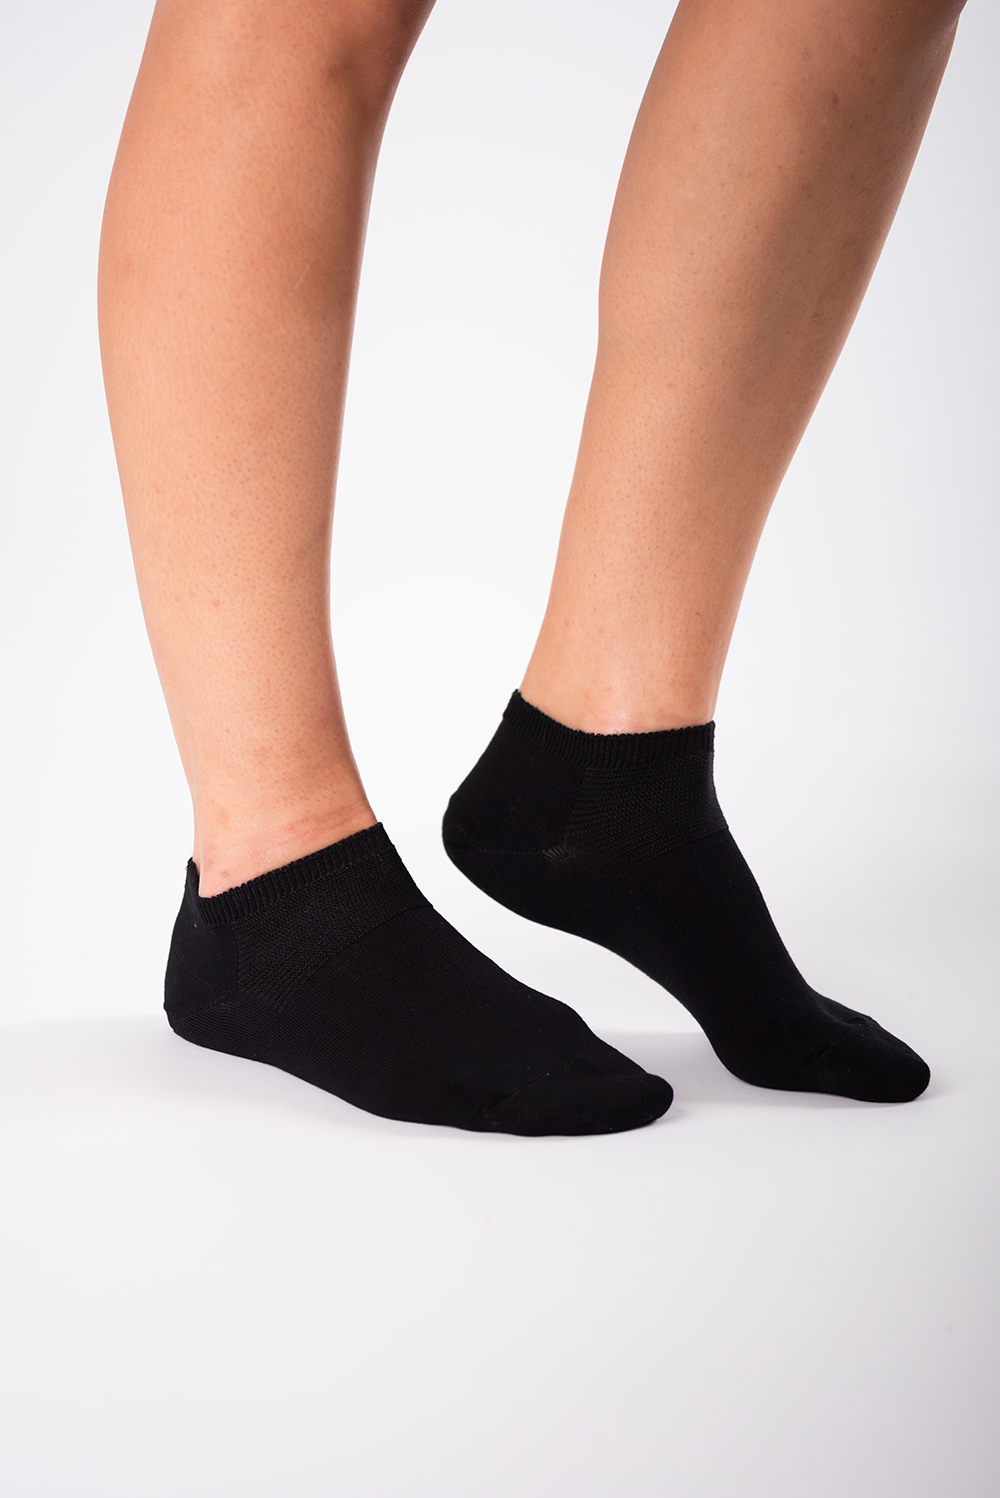  Lomitract Crew Long Bamboo Boot High Quarter Tall Mid Calf Mini  Ankle Cotton Thin Length Half Socks Sox for Women: Black Dark, 2 Pairs :  Clothing, Shoes & Jewelry